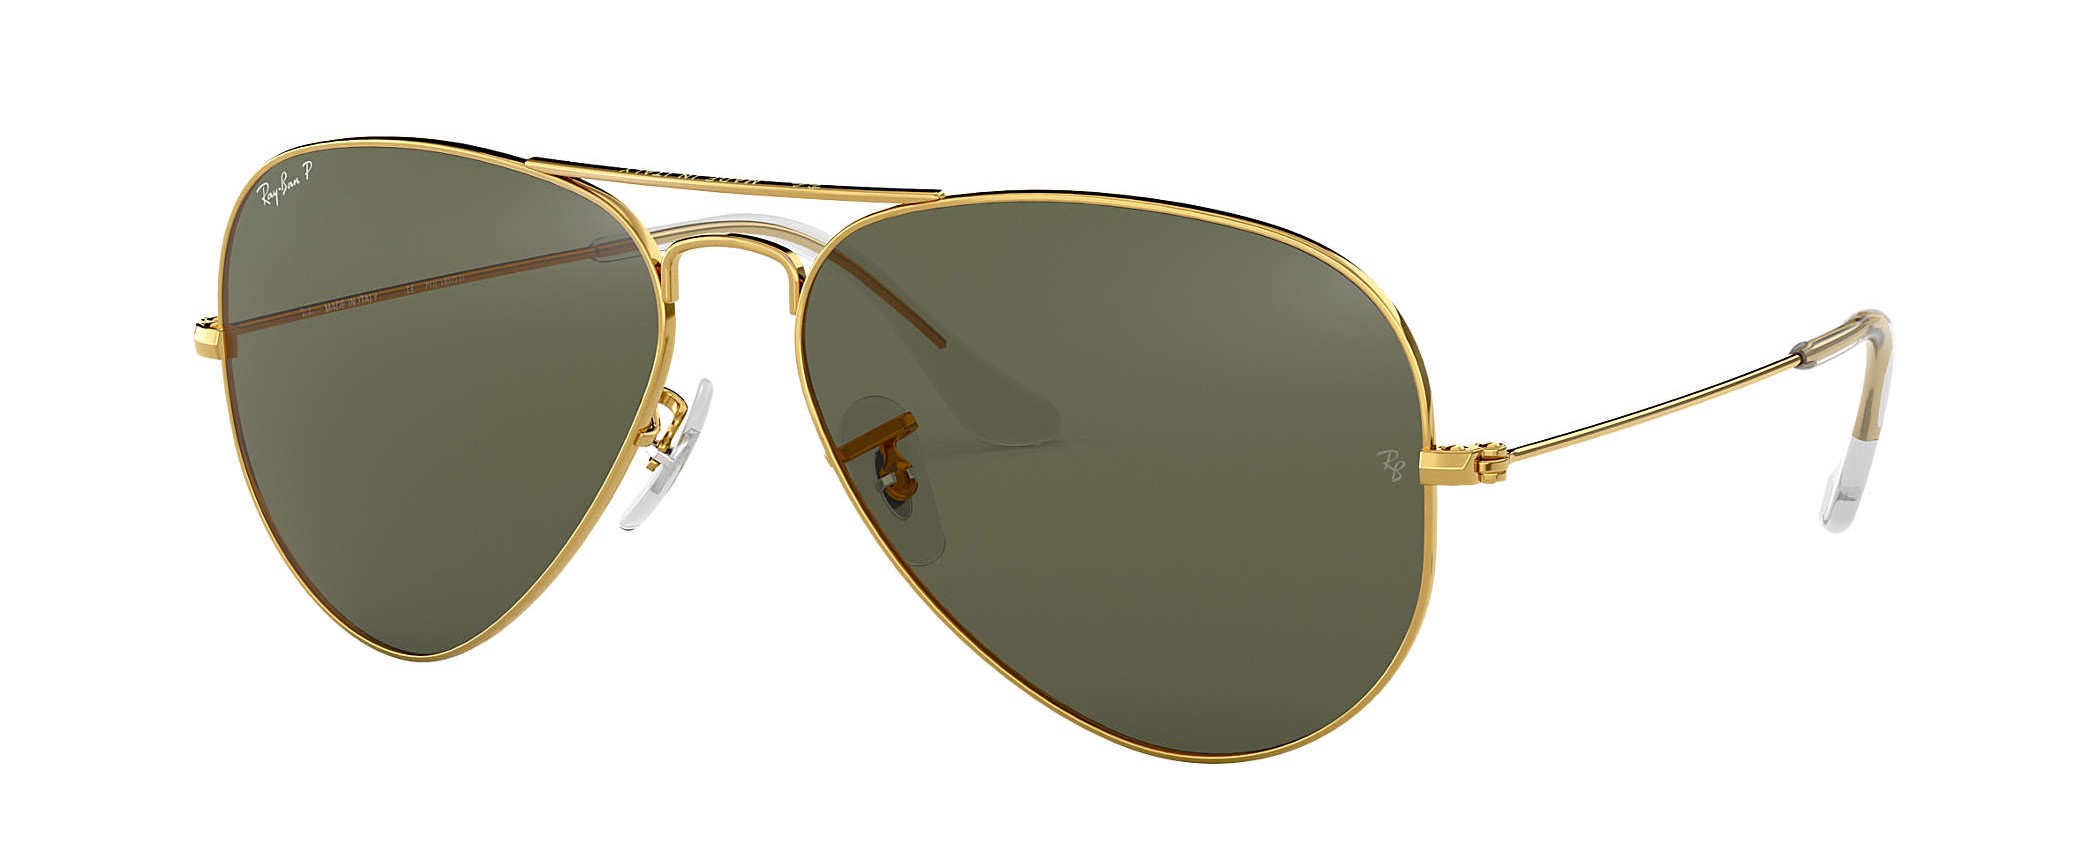 Ray-Ban Aviator Size Guide: Which Is Your Perfect Fit? | SportRx.com -  Transforming your visual experience.